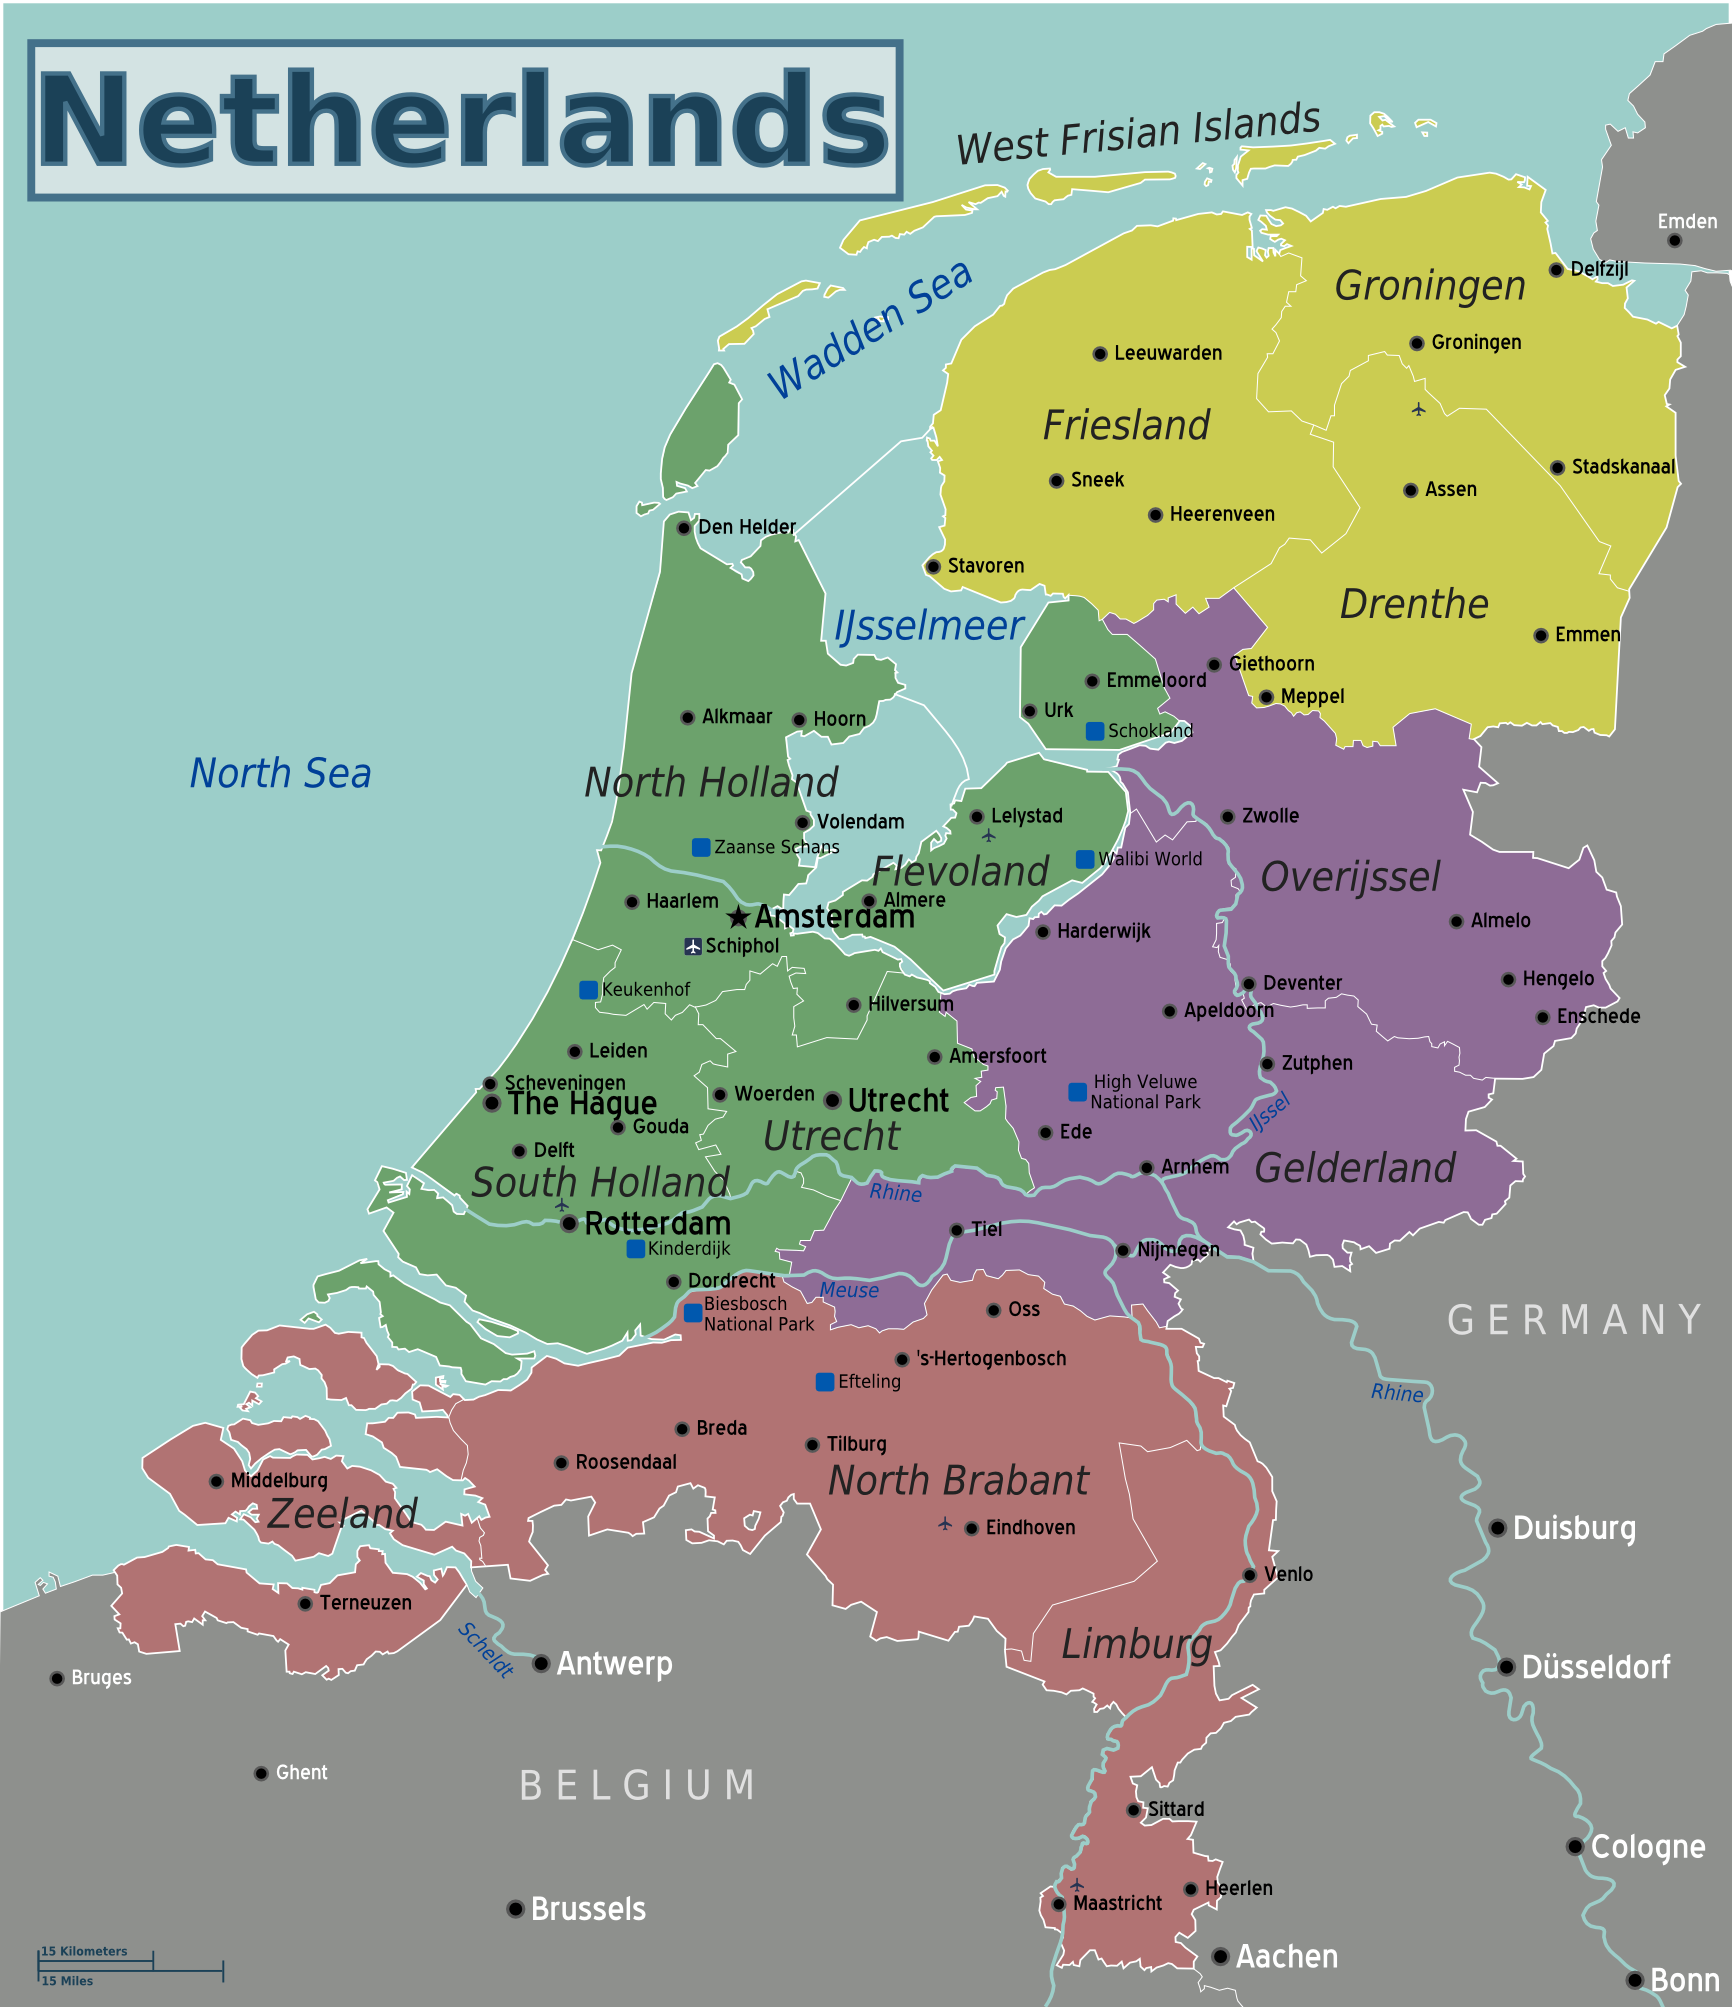 Map of Rhineland and Amstelland, the central part of Holland